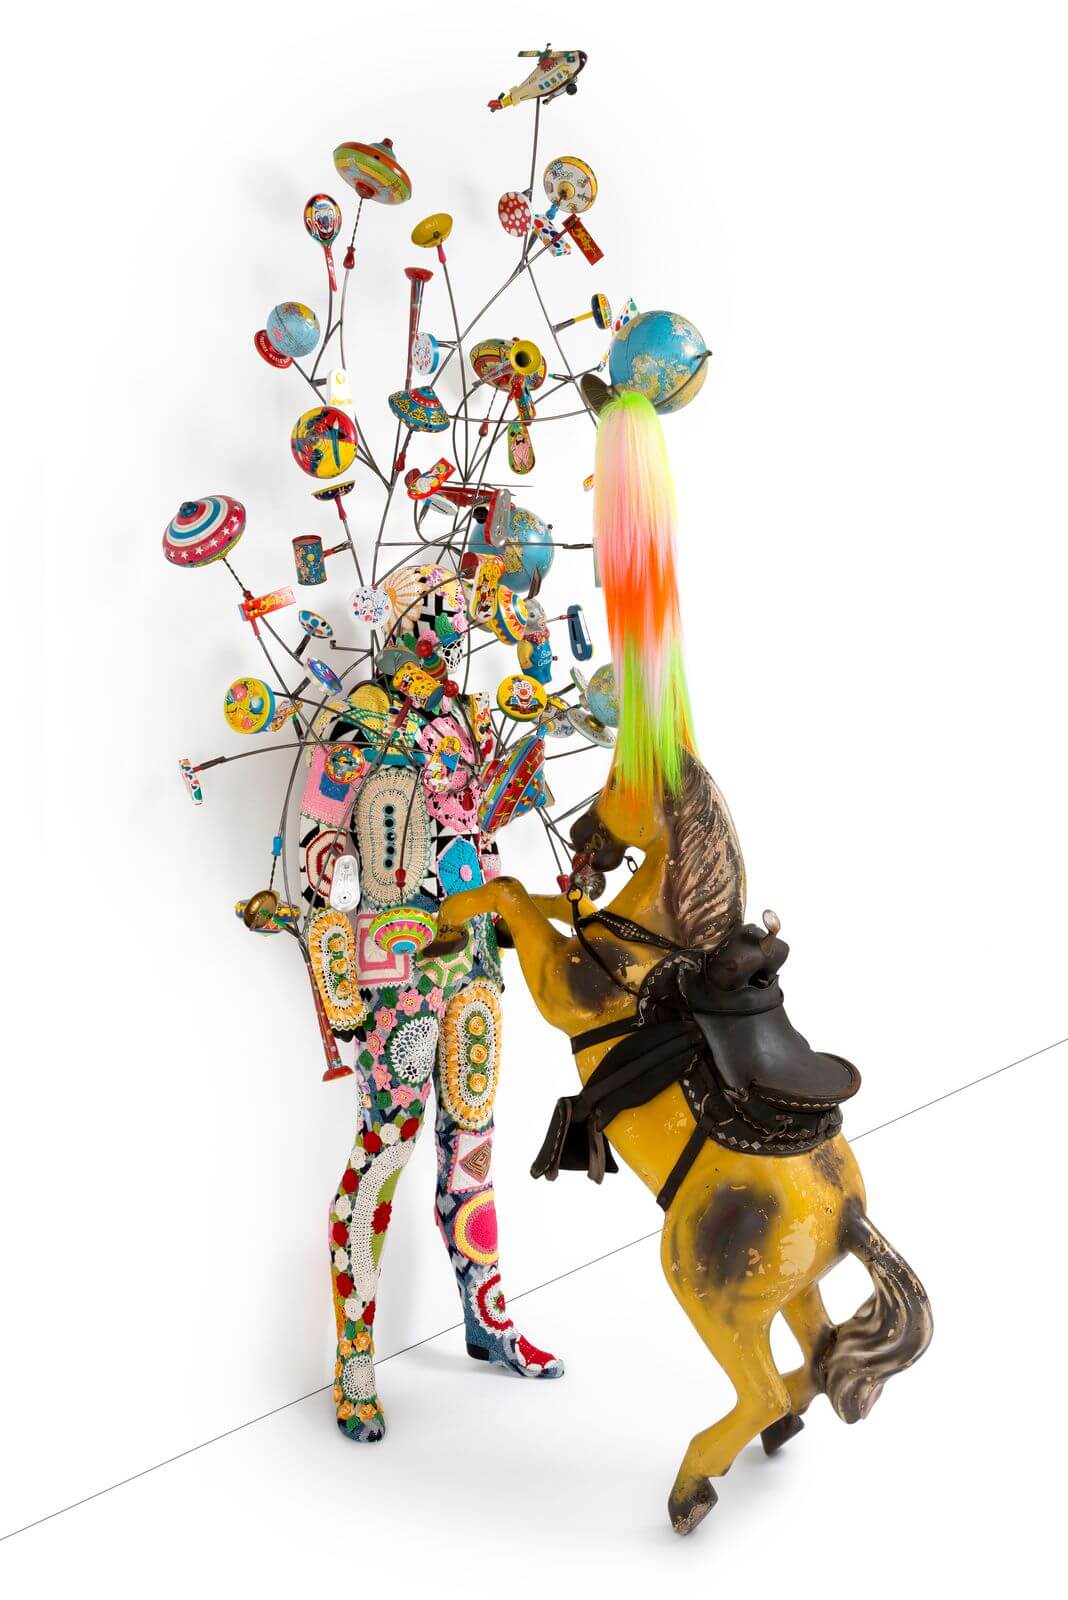 Nick Cave Soundsuit 2016 Mixed media including a large toy horse and various other toys, gloves, wire, metal and mannequin 300 x 152,5 x 127 cm © Nick Cave. Photo by James Prinz Photography. Courtesy of the artist and Jack Shainman Gallery, New York. Collection Fondation Villa Datris